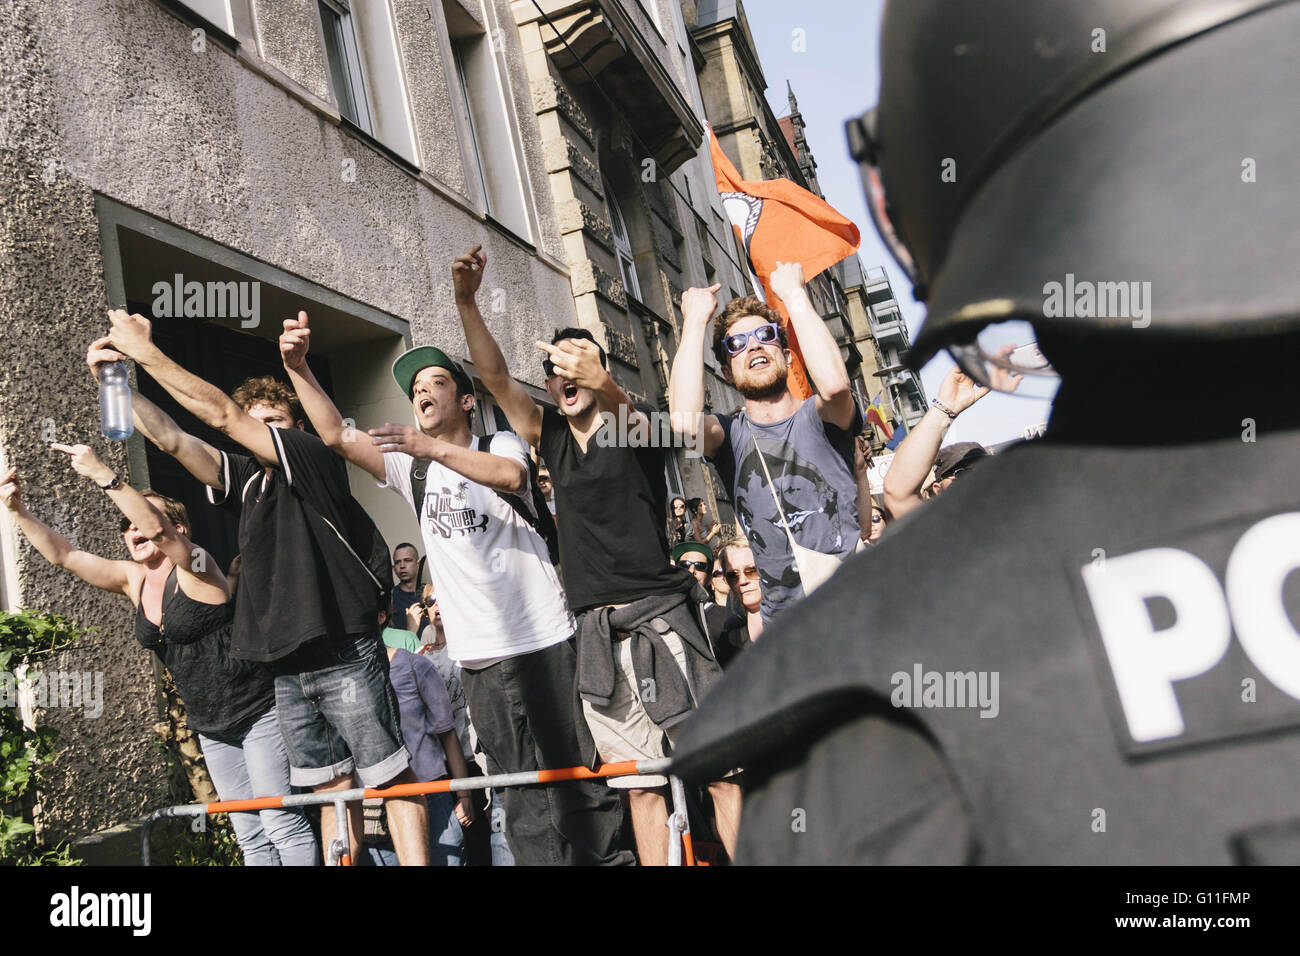 Berlin, Germany. 7th May, 2016. Activists during the counter protests against the rally held under the motto 'Merkel muss weg![Merkel must go]' organised by far-right group 'We for Berlin & We for Germany' Credit:  Jan Scheunert/ZUMA Wire/Alamy Live News Stock Photo